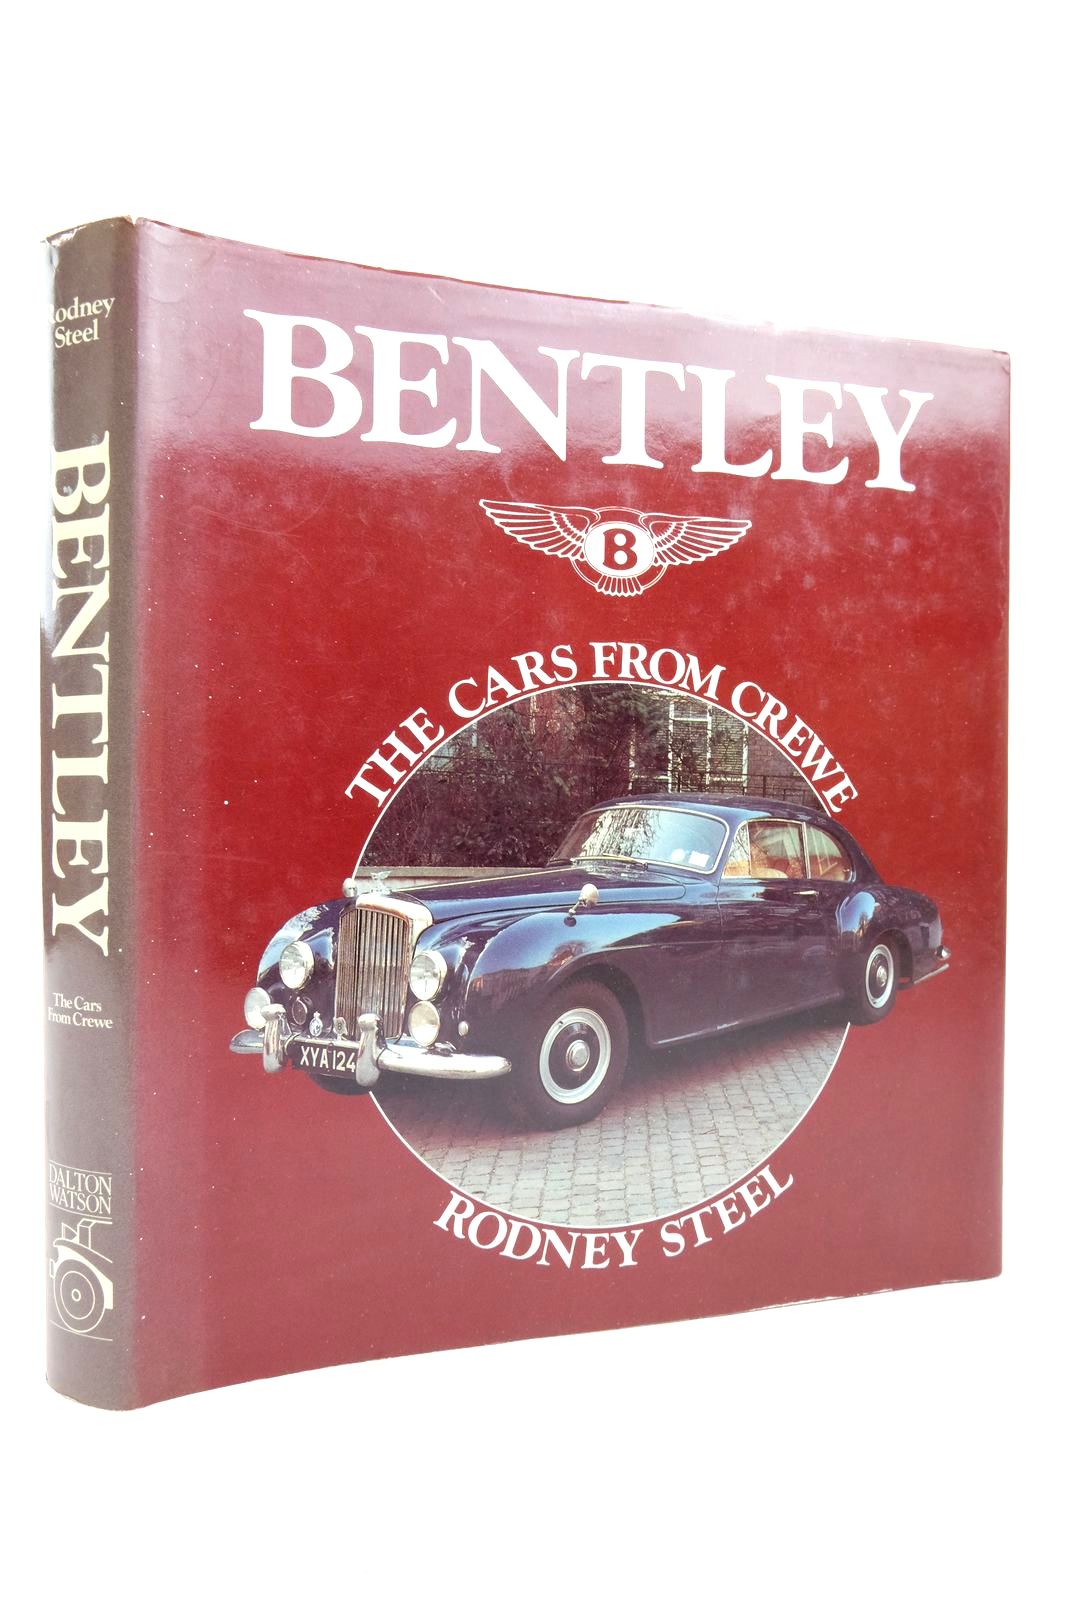 Photo of BENTLEY: THE CARS FROM CREWE written by Steel, Rodney published by Dalton Watson (STOCK CODE: 2136824)  for sale by Stella & Rose's Books